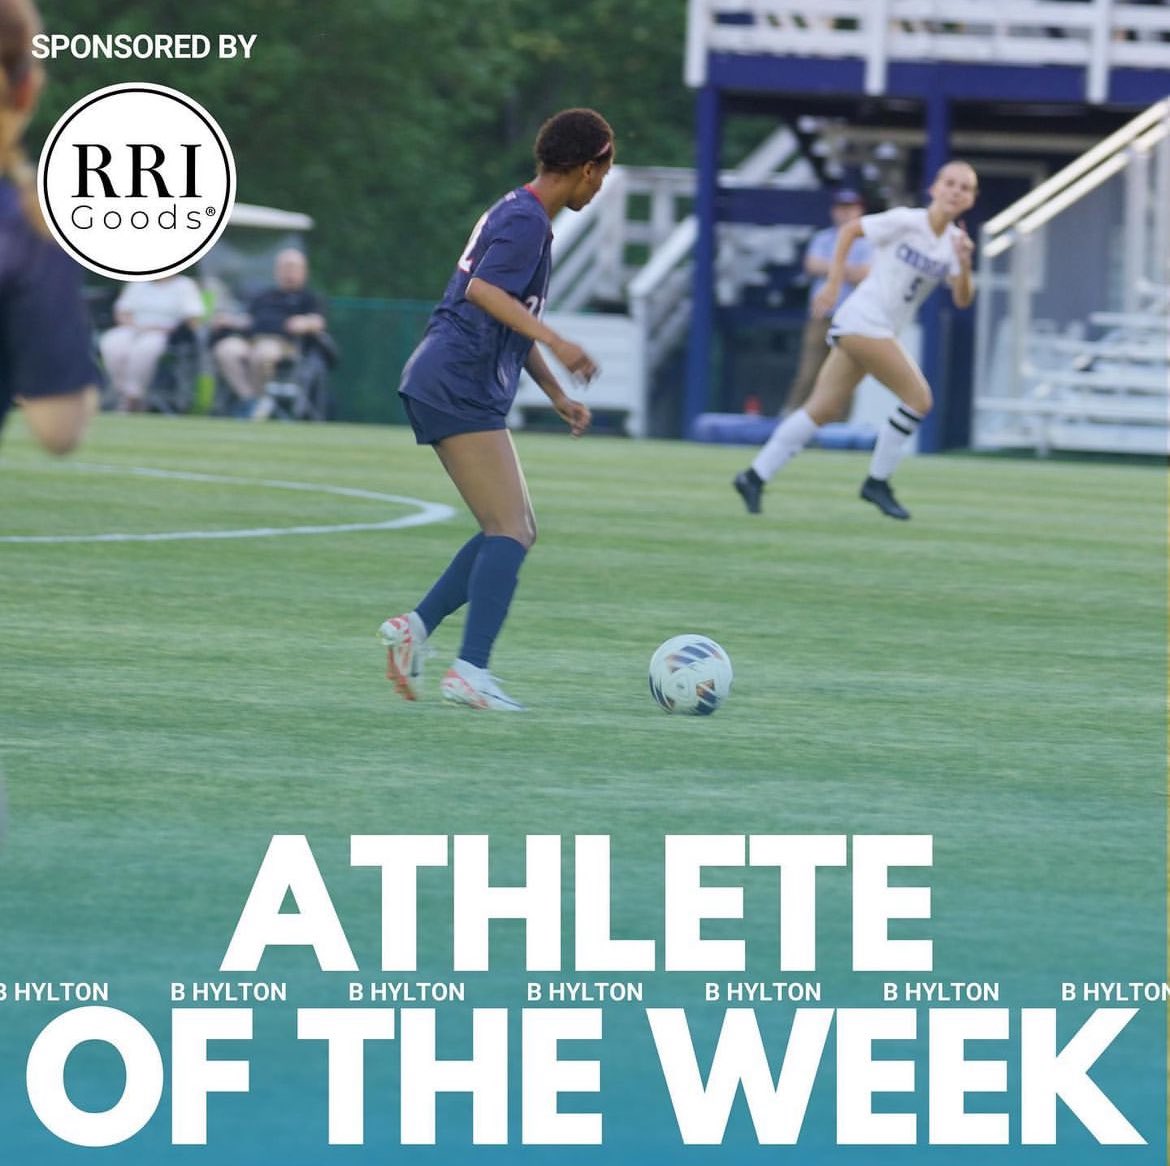 Congrats to @rrigoods athlete of the week, B Hylton!

B led varsity girls' soccer to a thrilling victory over Country Day by scoring the game-winning goal just 8 seconds before the final whistle.

She also had 2 goals and 1 assist in last night’s victory. 

#GoLions #RoarAsOne